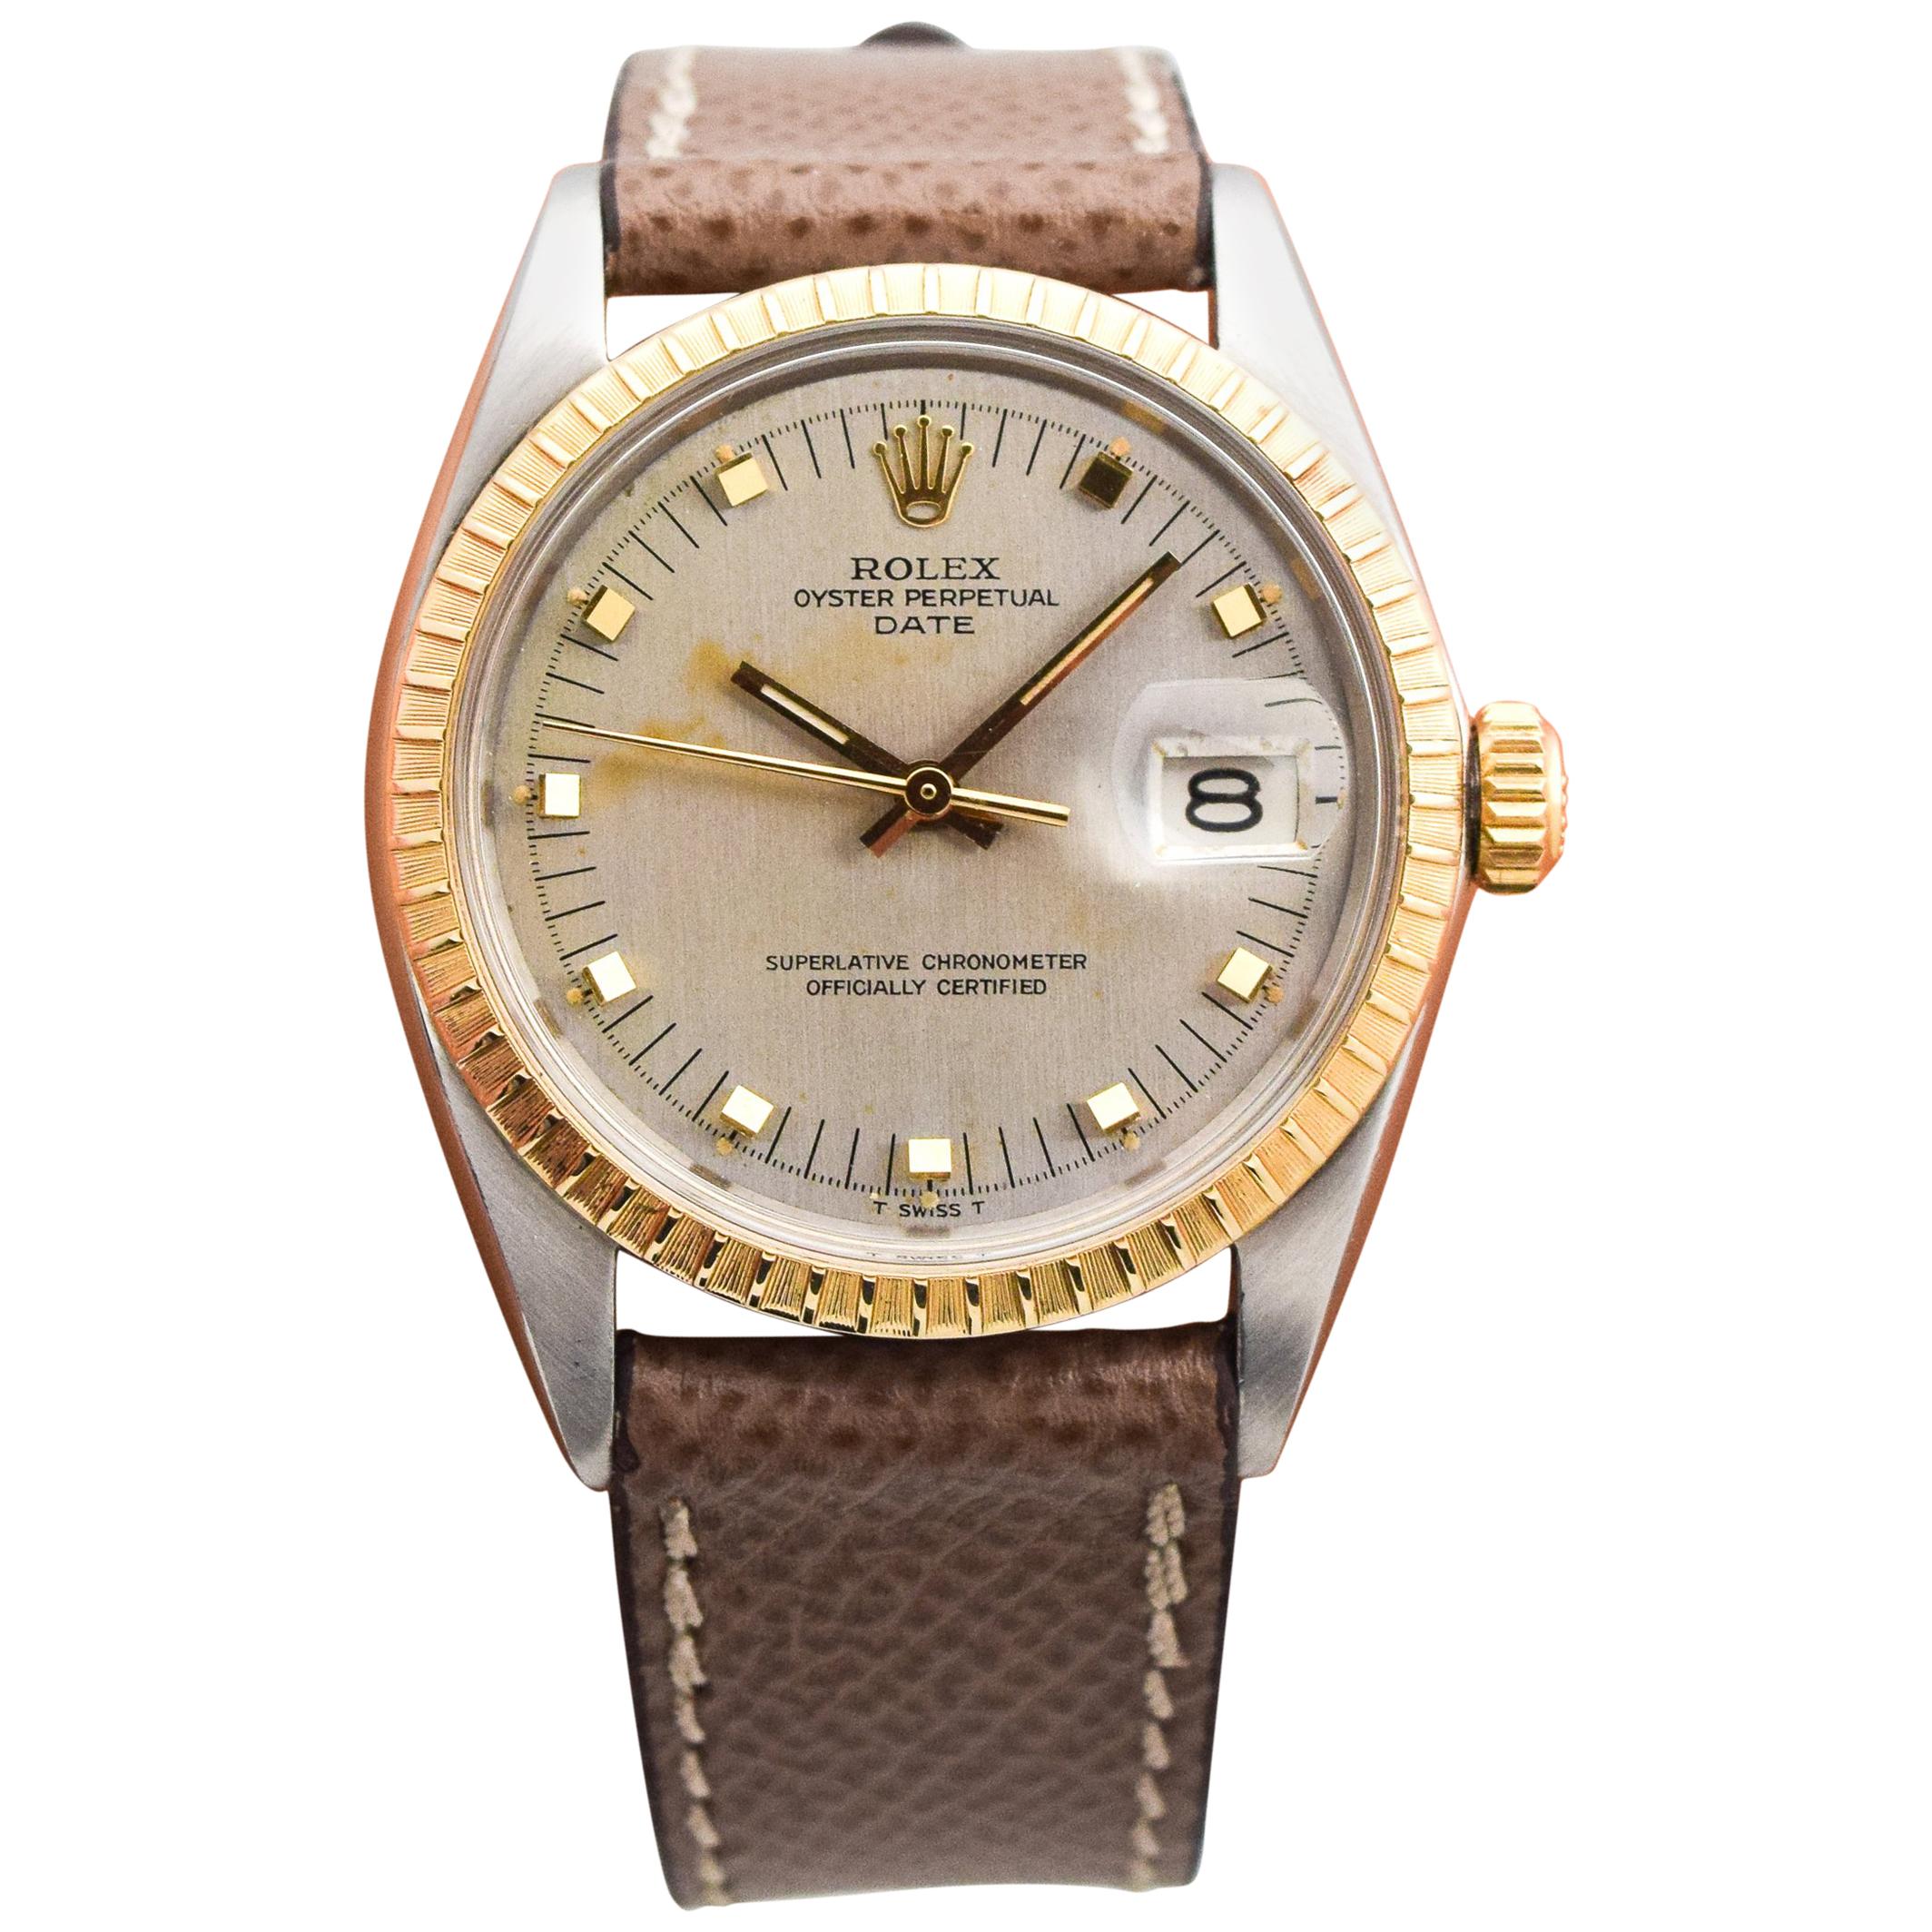 Rolex Date Automatic Ref. 1505 14 Karat Gold and Stainless Steel Watch, 1968 For Sale